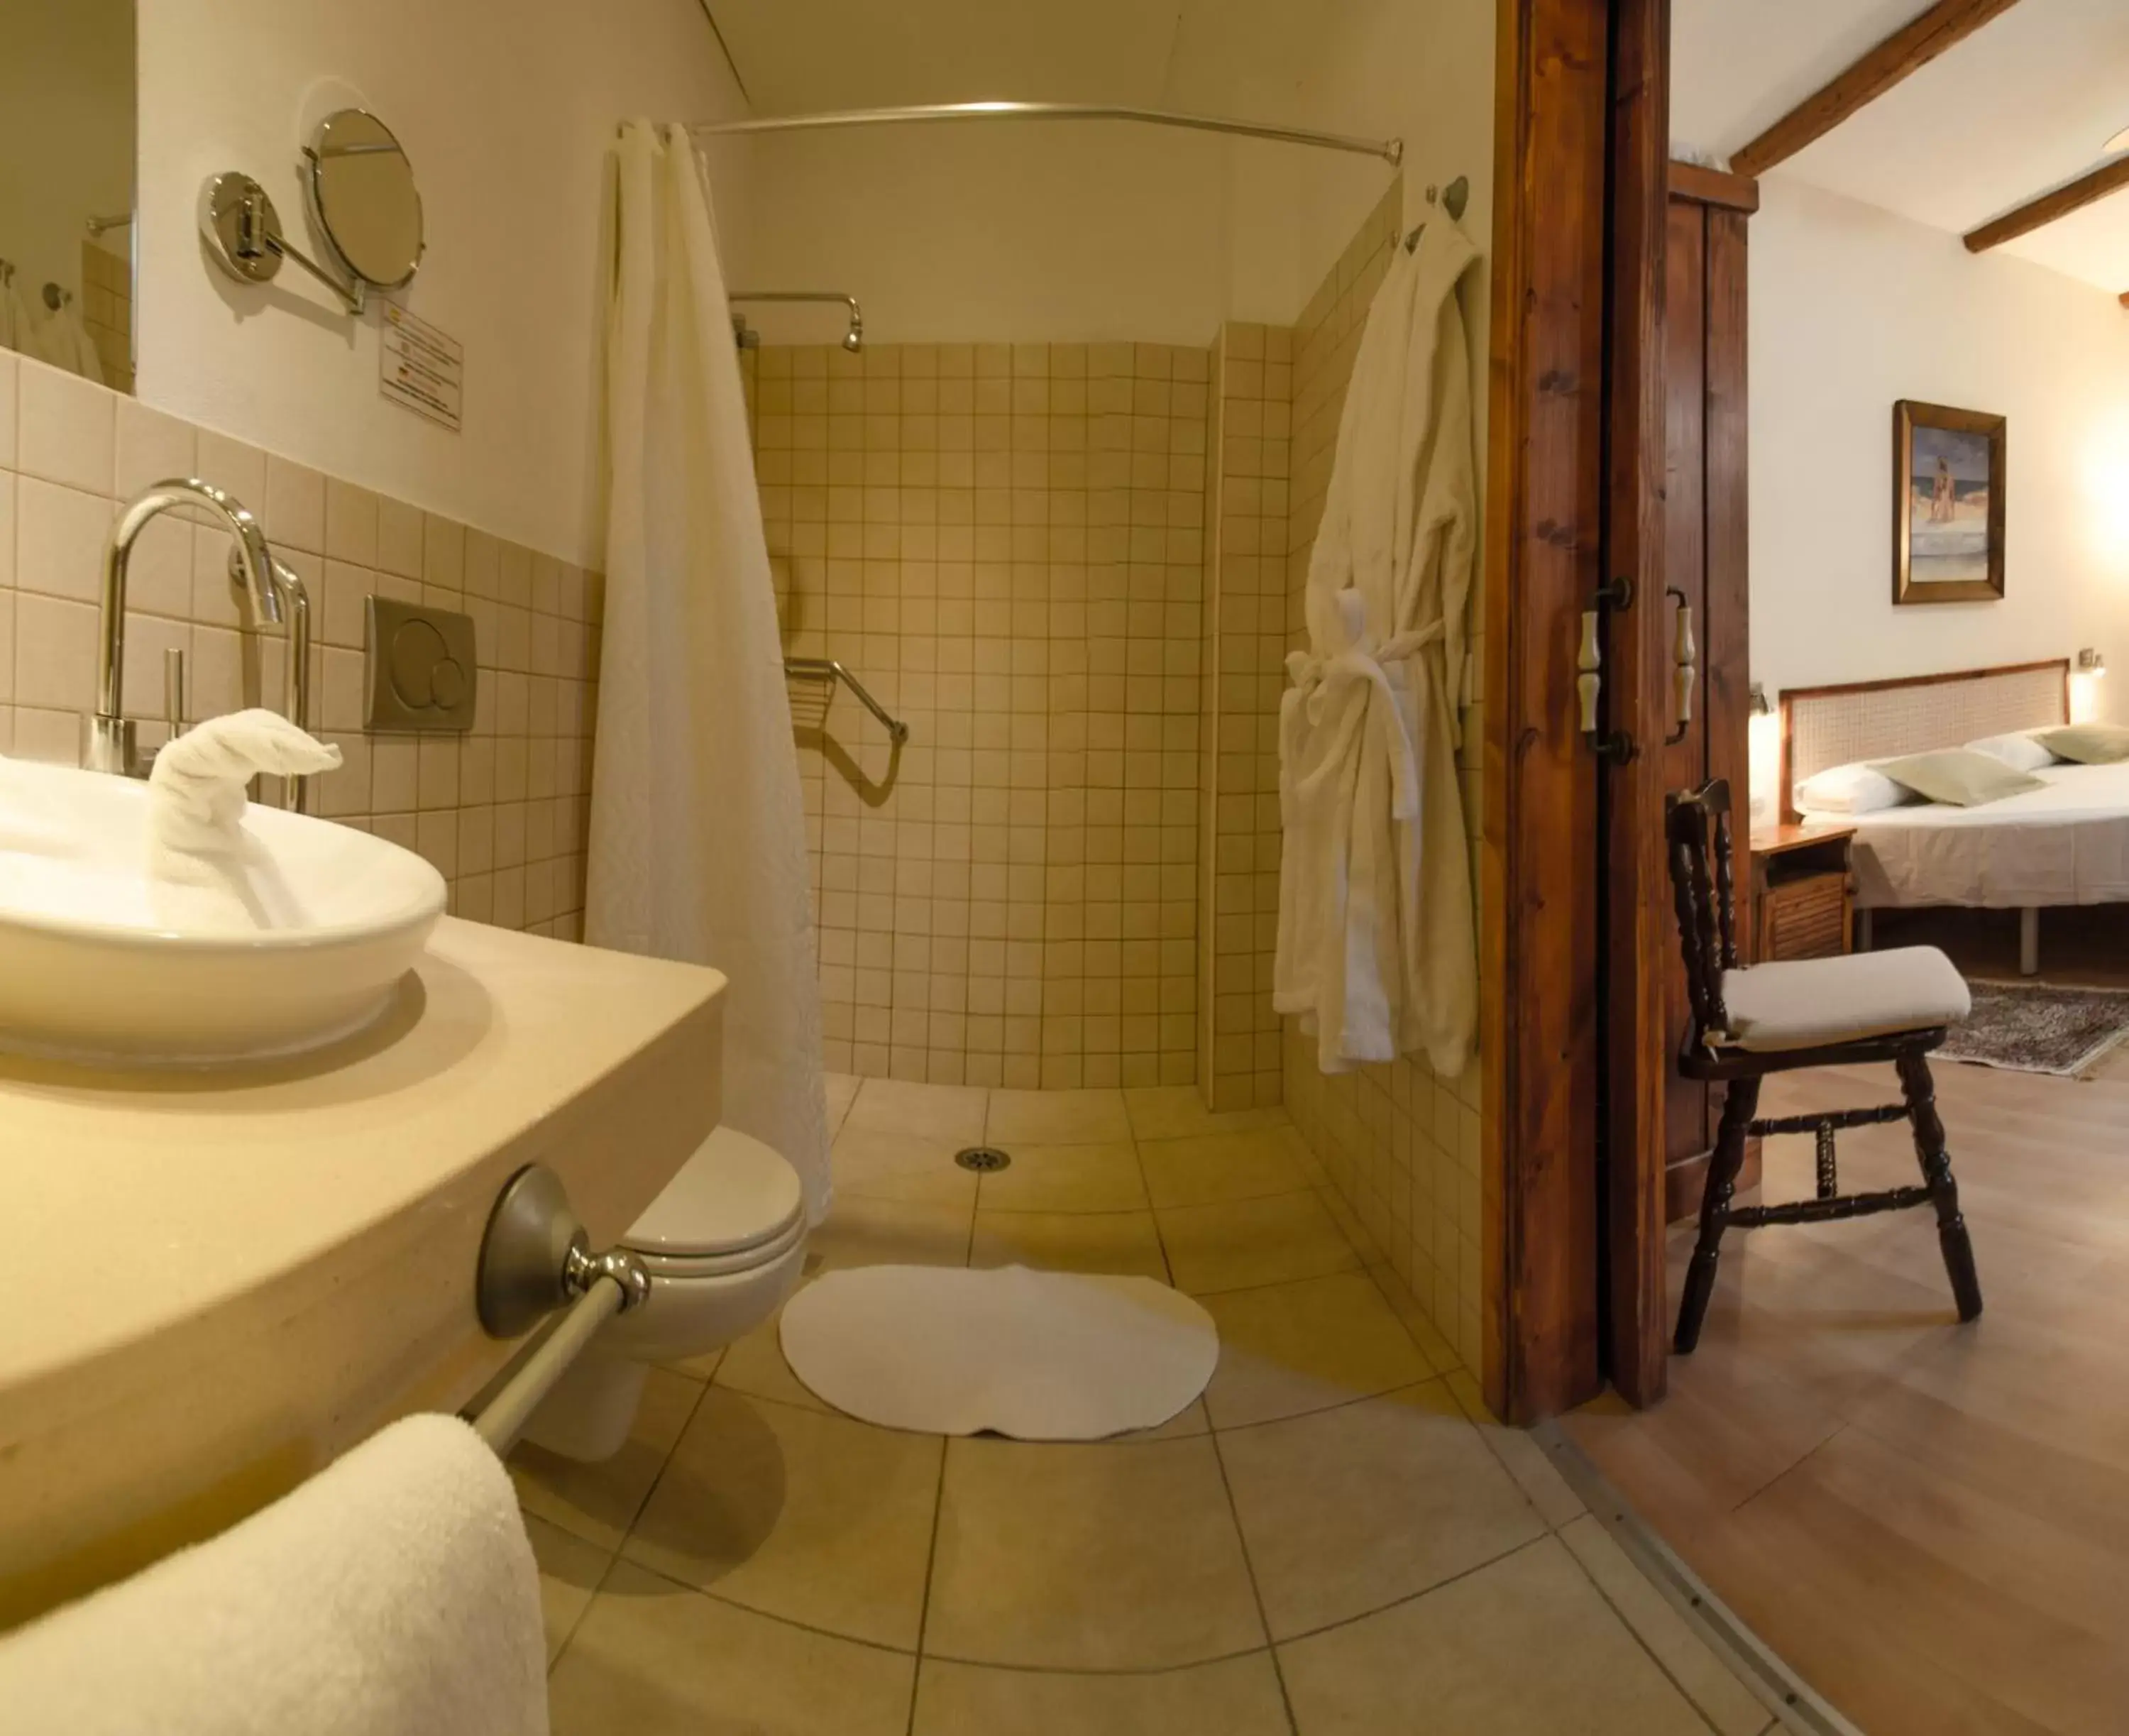 Facility for disabled guests, Bathroom in Gara Hotel